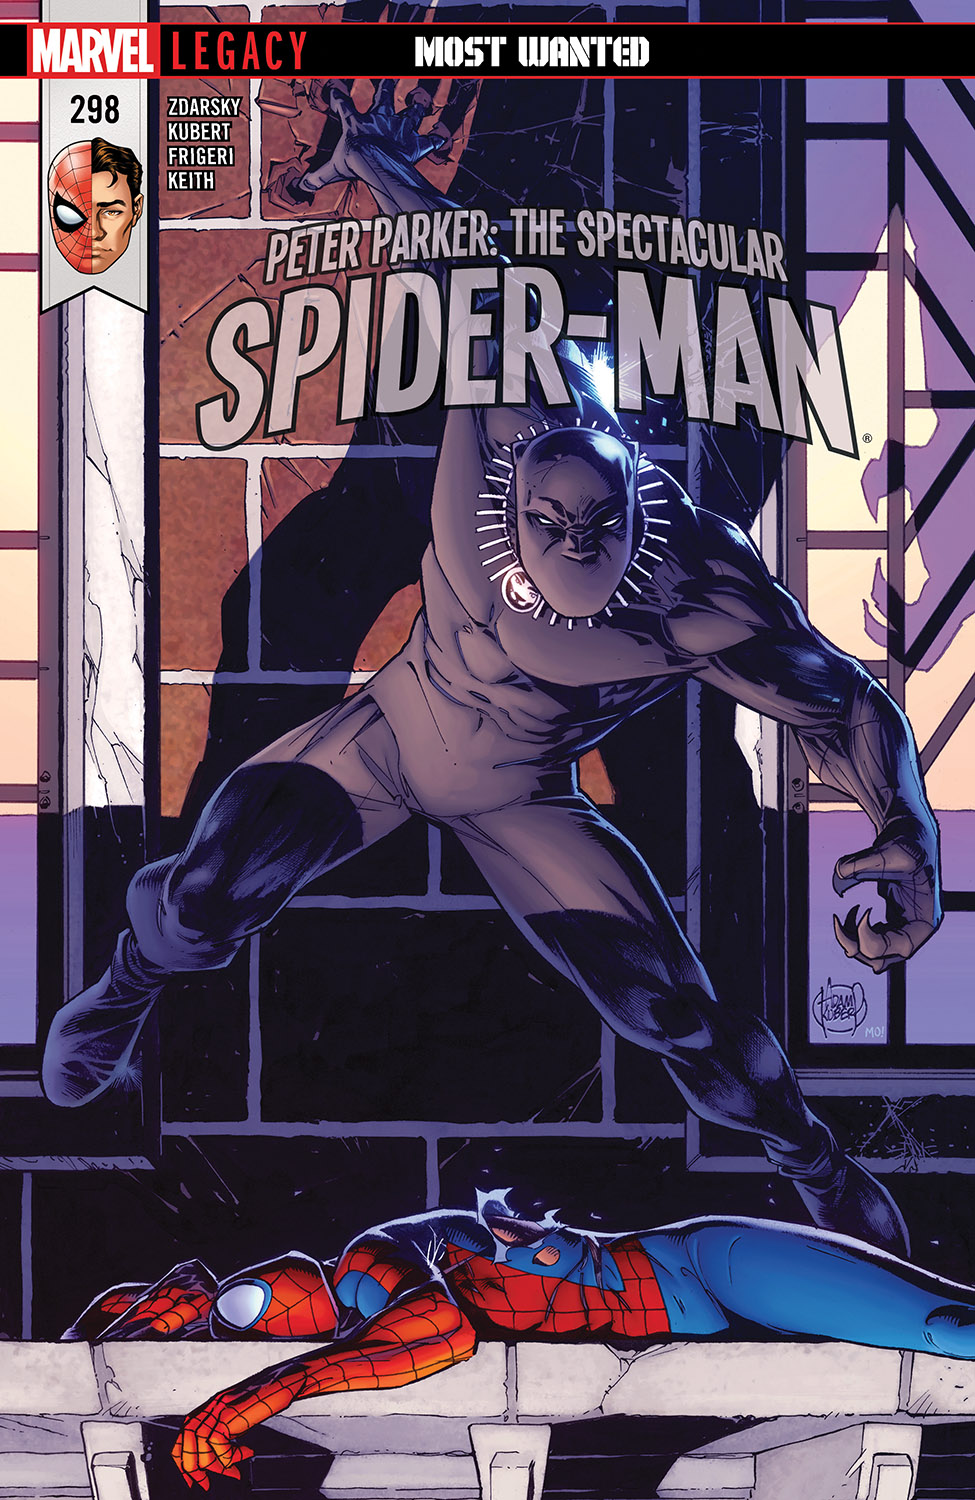 Peter Parker: The Spectacular Spider-Man (2017) #298 | Comic Issues | Marvel